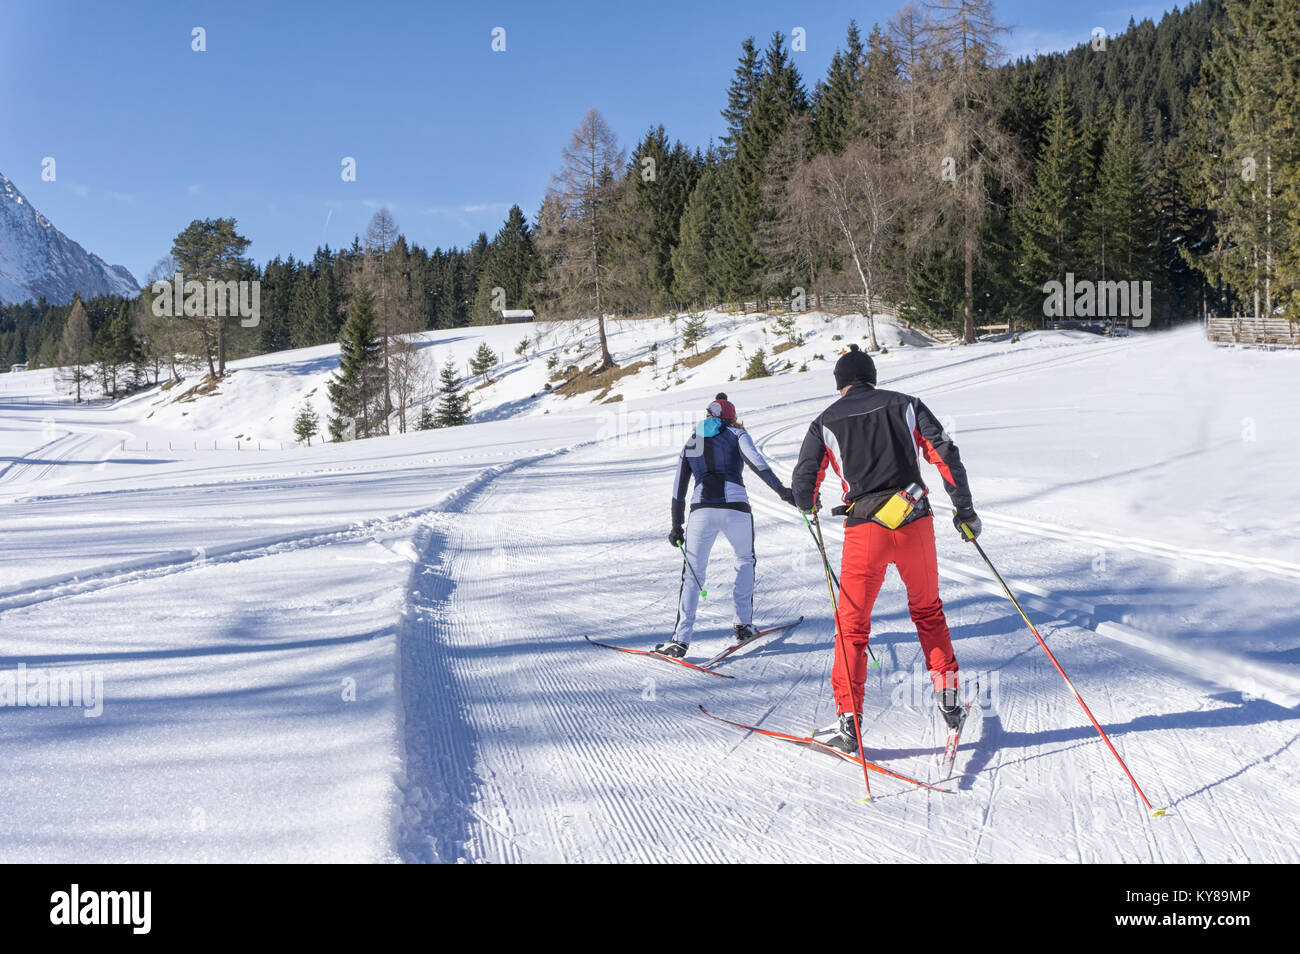 Two cross-country Skiers runs on groomed ski track in sunny winter day. Winter mountain landscape: Tirol, Alps, Austria. Stock Photo